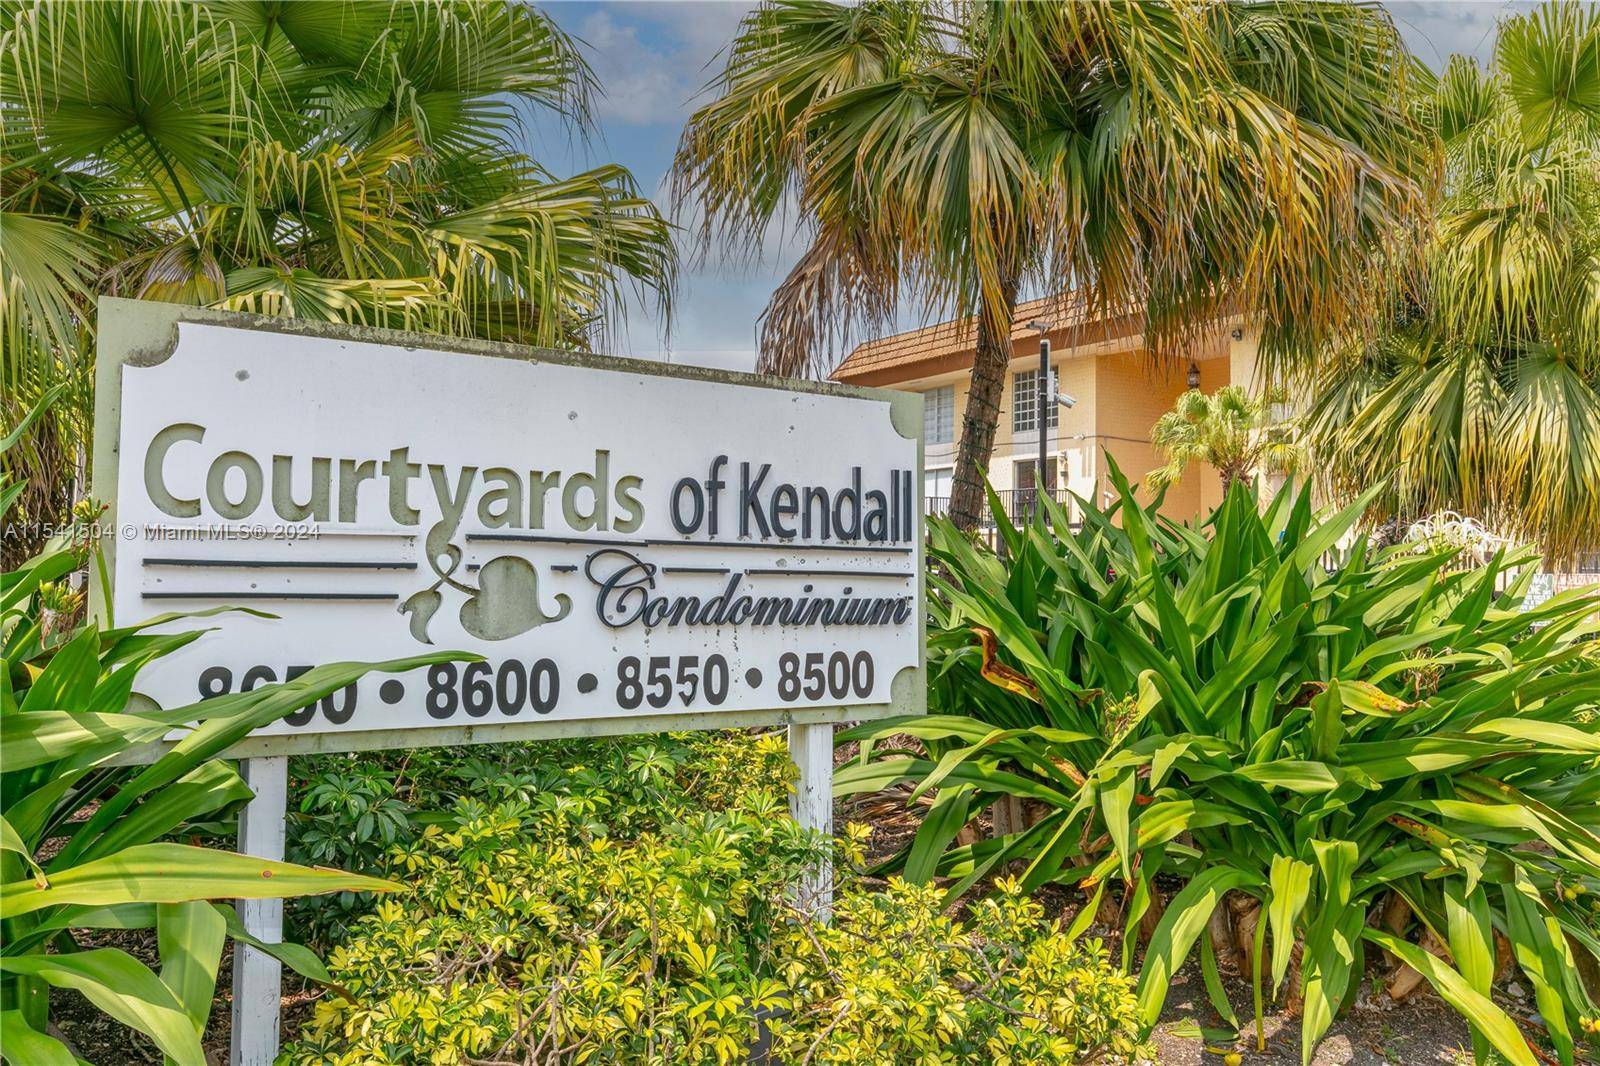 Spacious 2 story apartment in the heart of Kendall and close to the mayor highways and shopping malls.